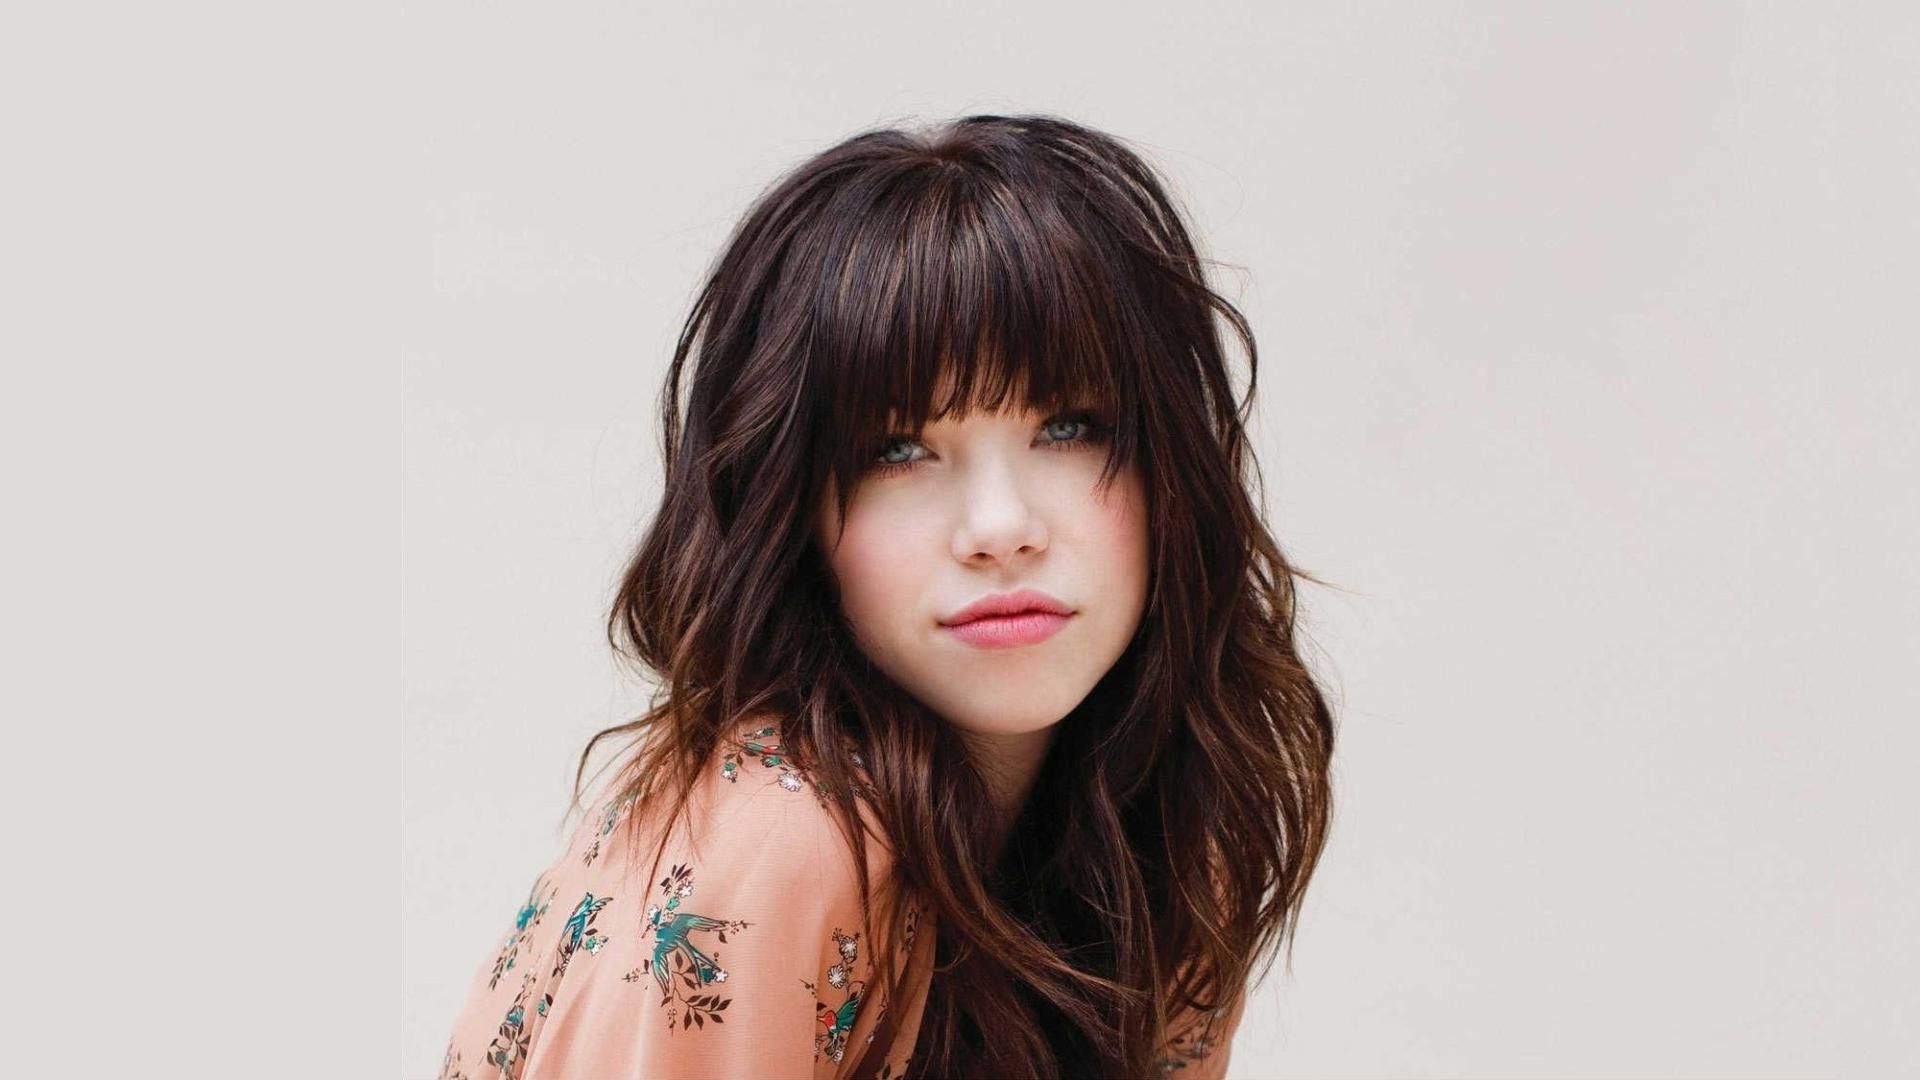 Carly Rae Jepsen Wallpaper High Resolution And Quality